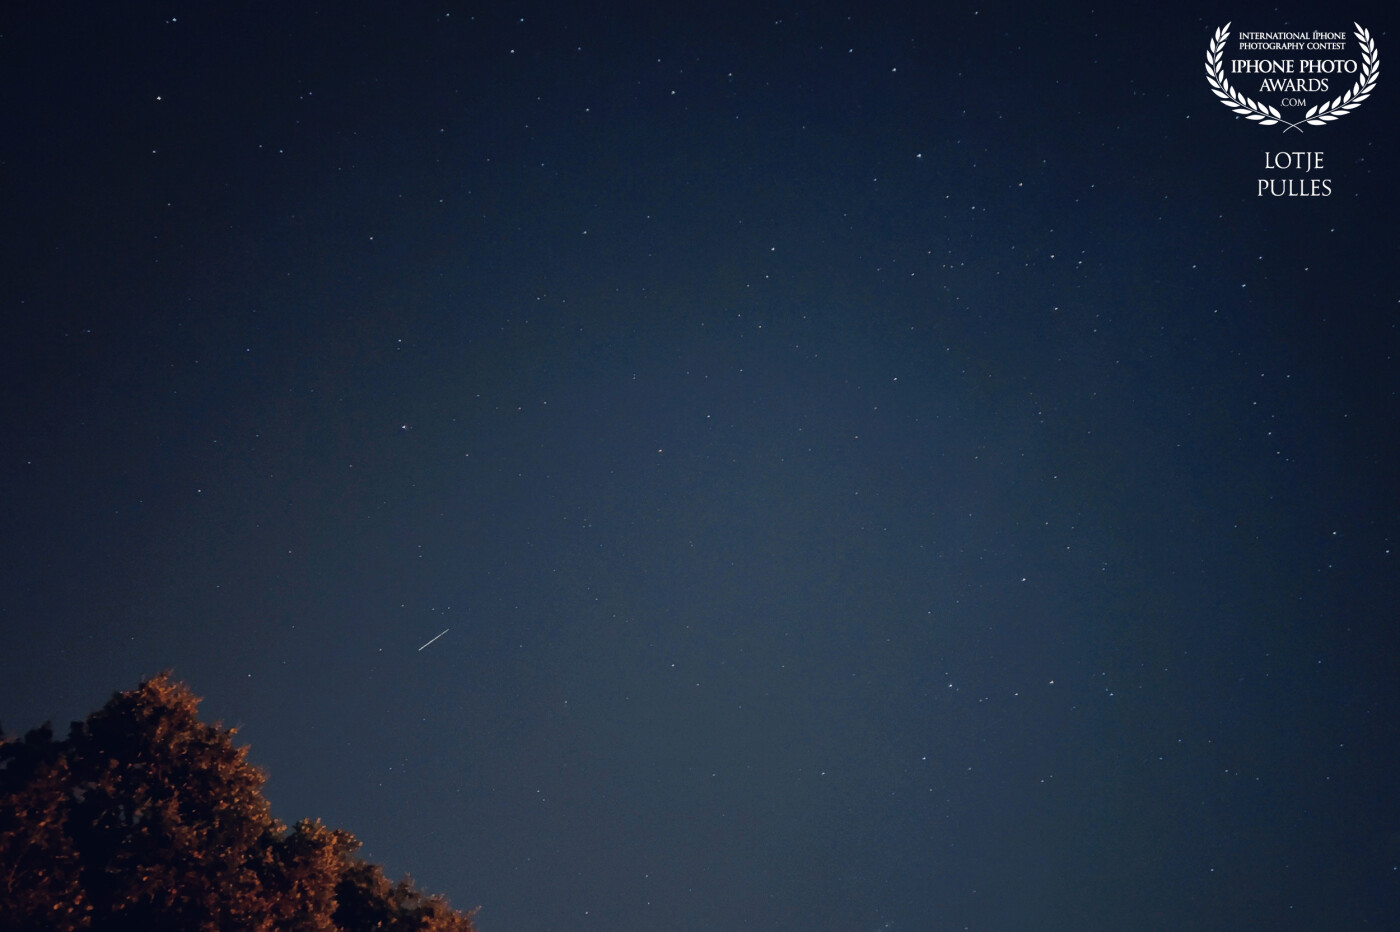 Just a little capture of the perseid meteor shower.